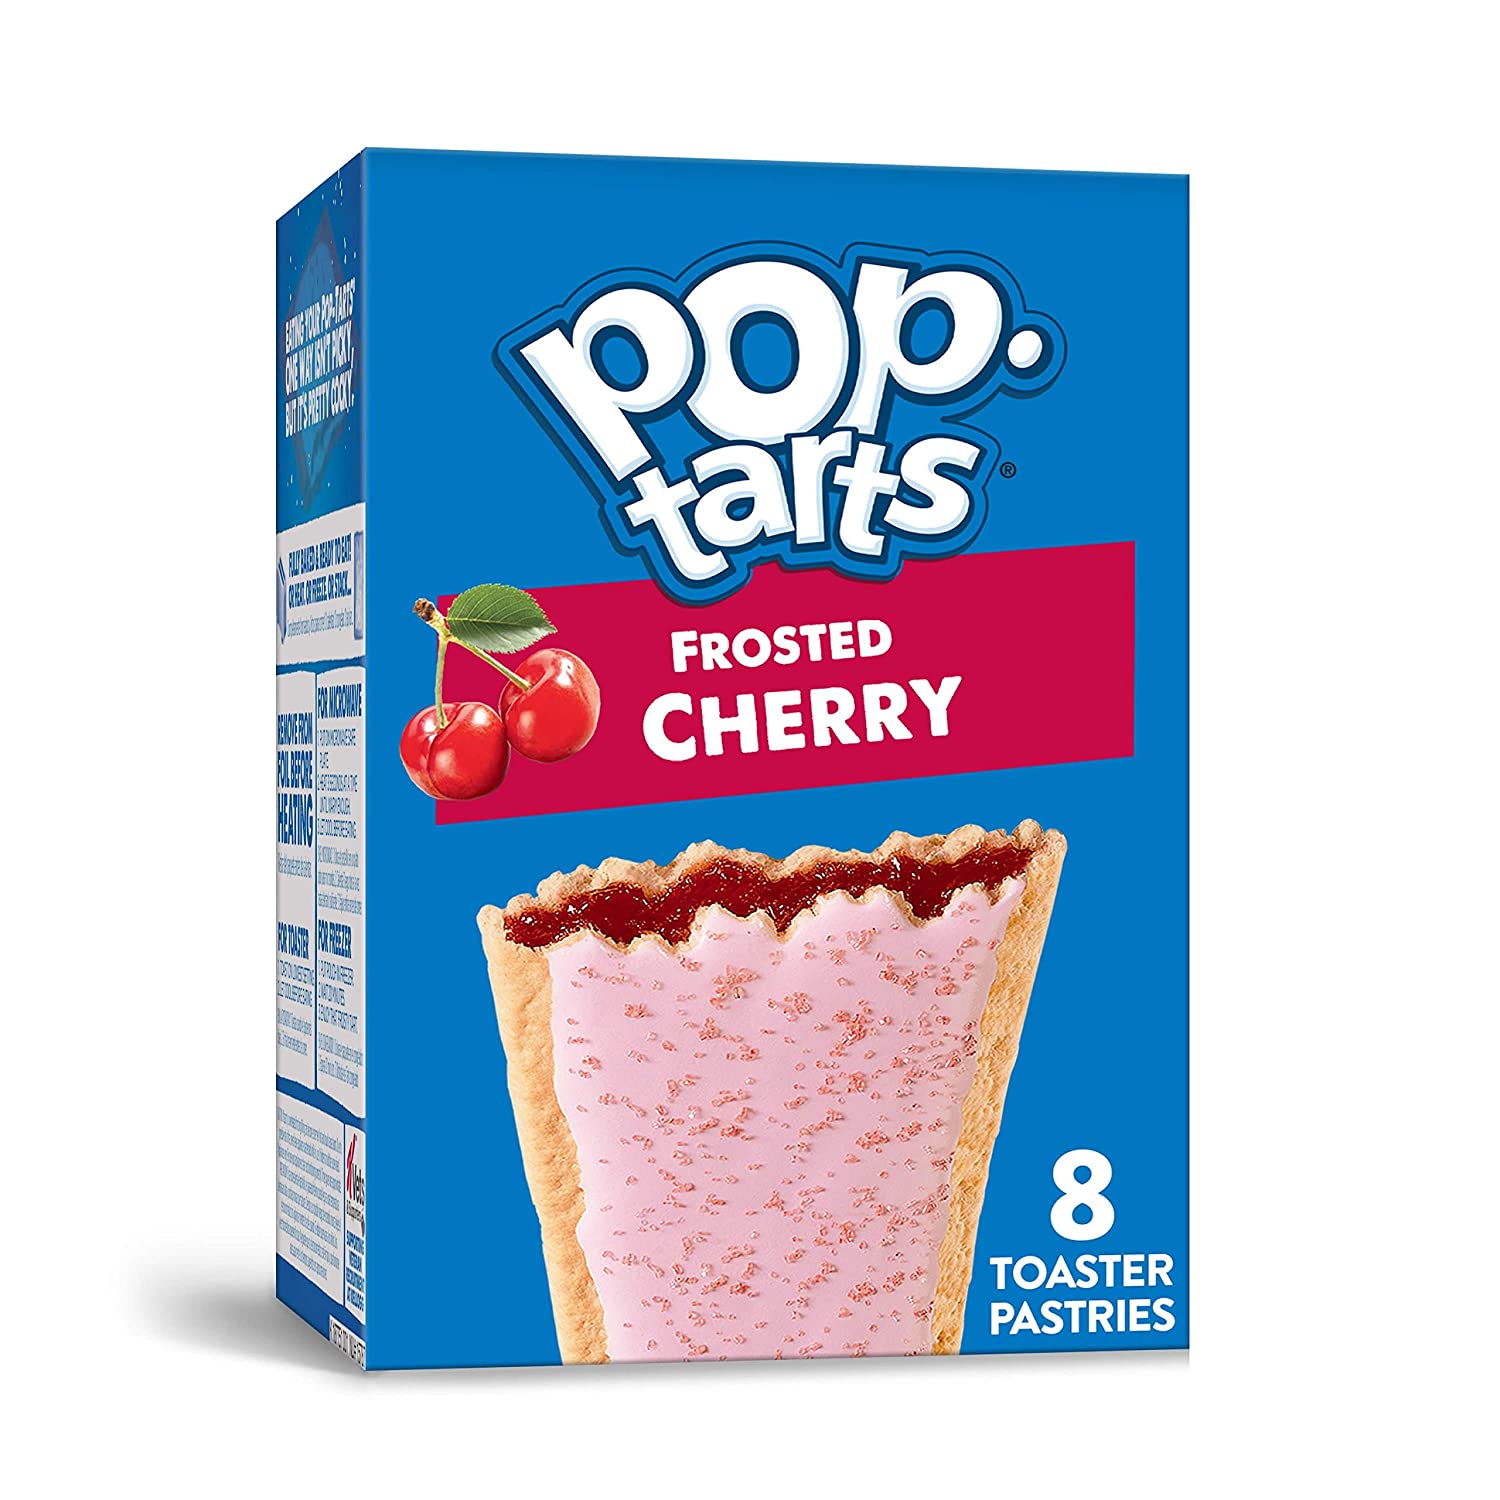 Pop Tarts Frosted Cherry Image